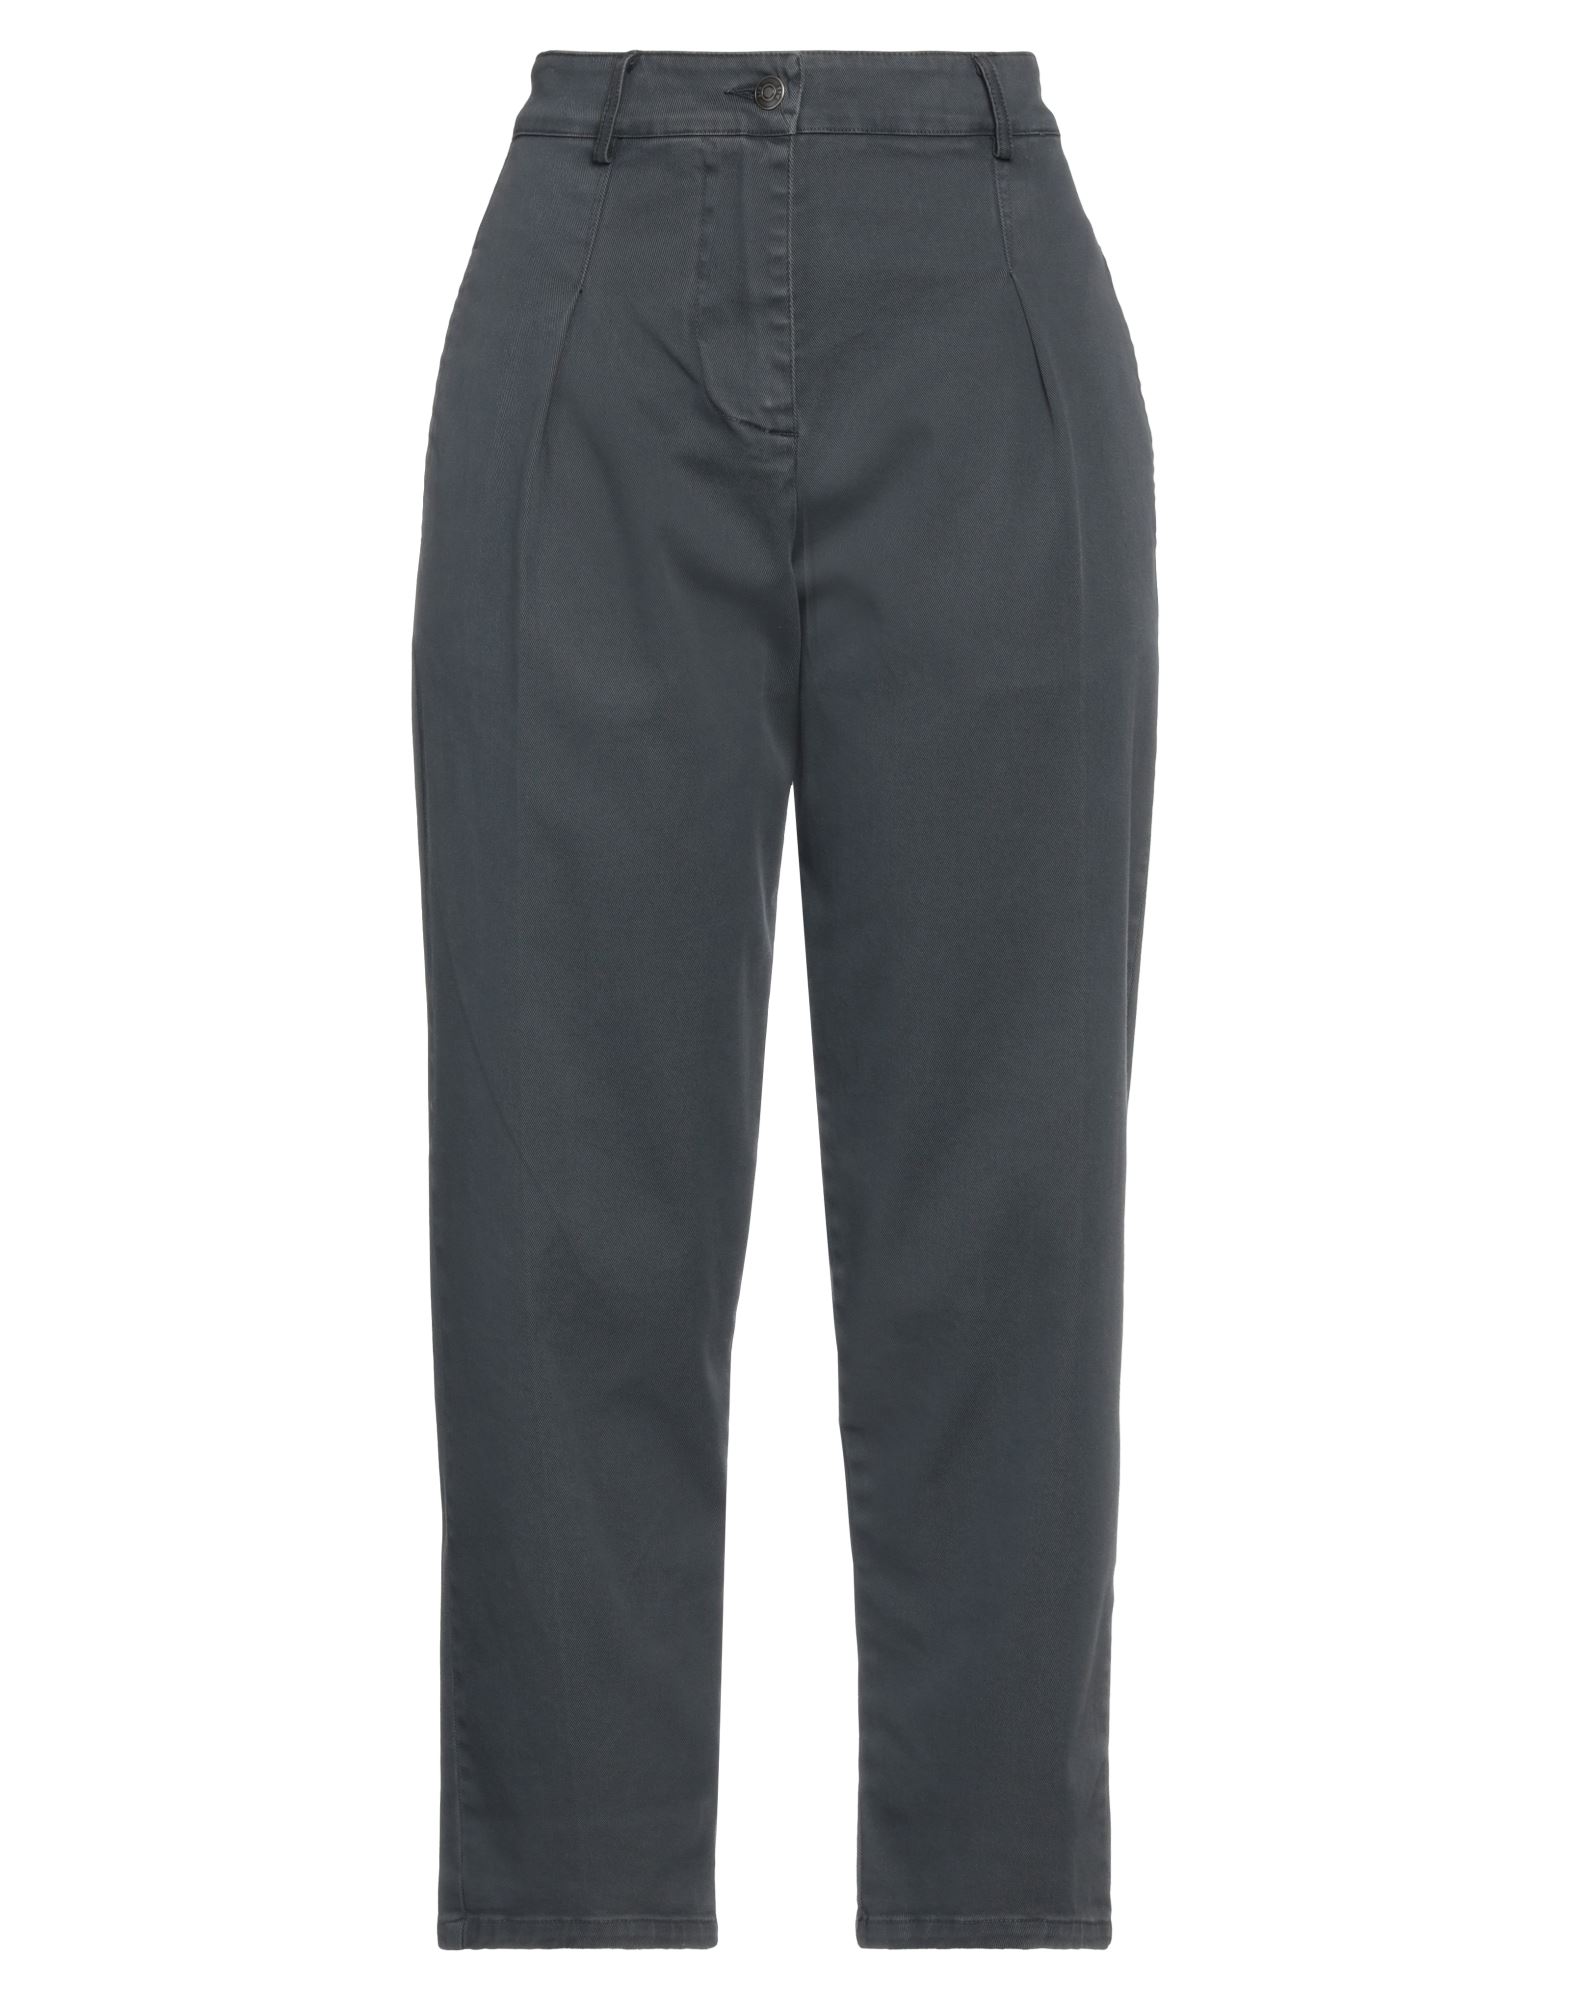 8pm Pants In Grey